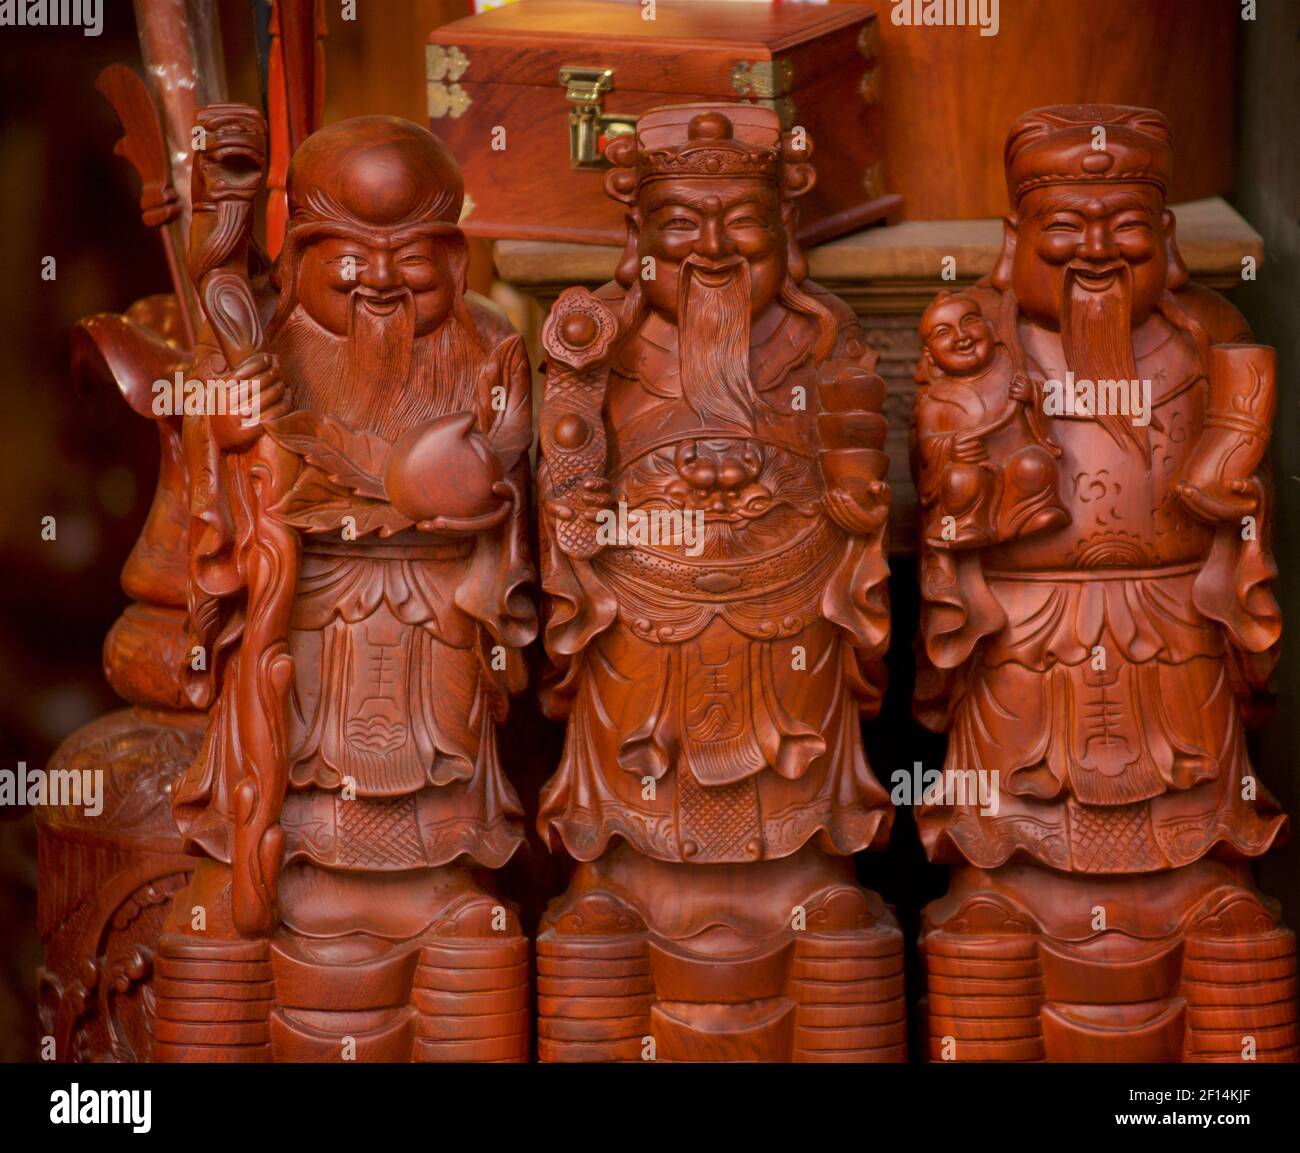 Confucian figurines for sale in a shop, Hanoi, Vietnam. Carved wood. Sanxing. Porcelain figurines of Fu Lu Shou. The Tao Gods of Good Fortune, Prosperity, and Longevity Stock Photo